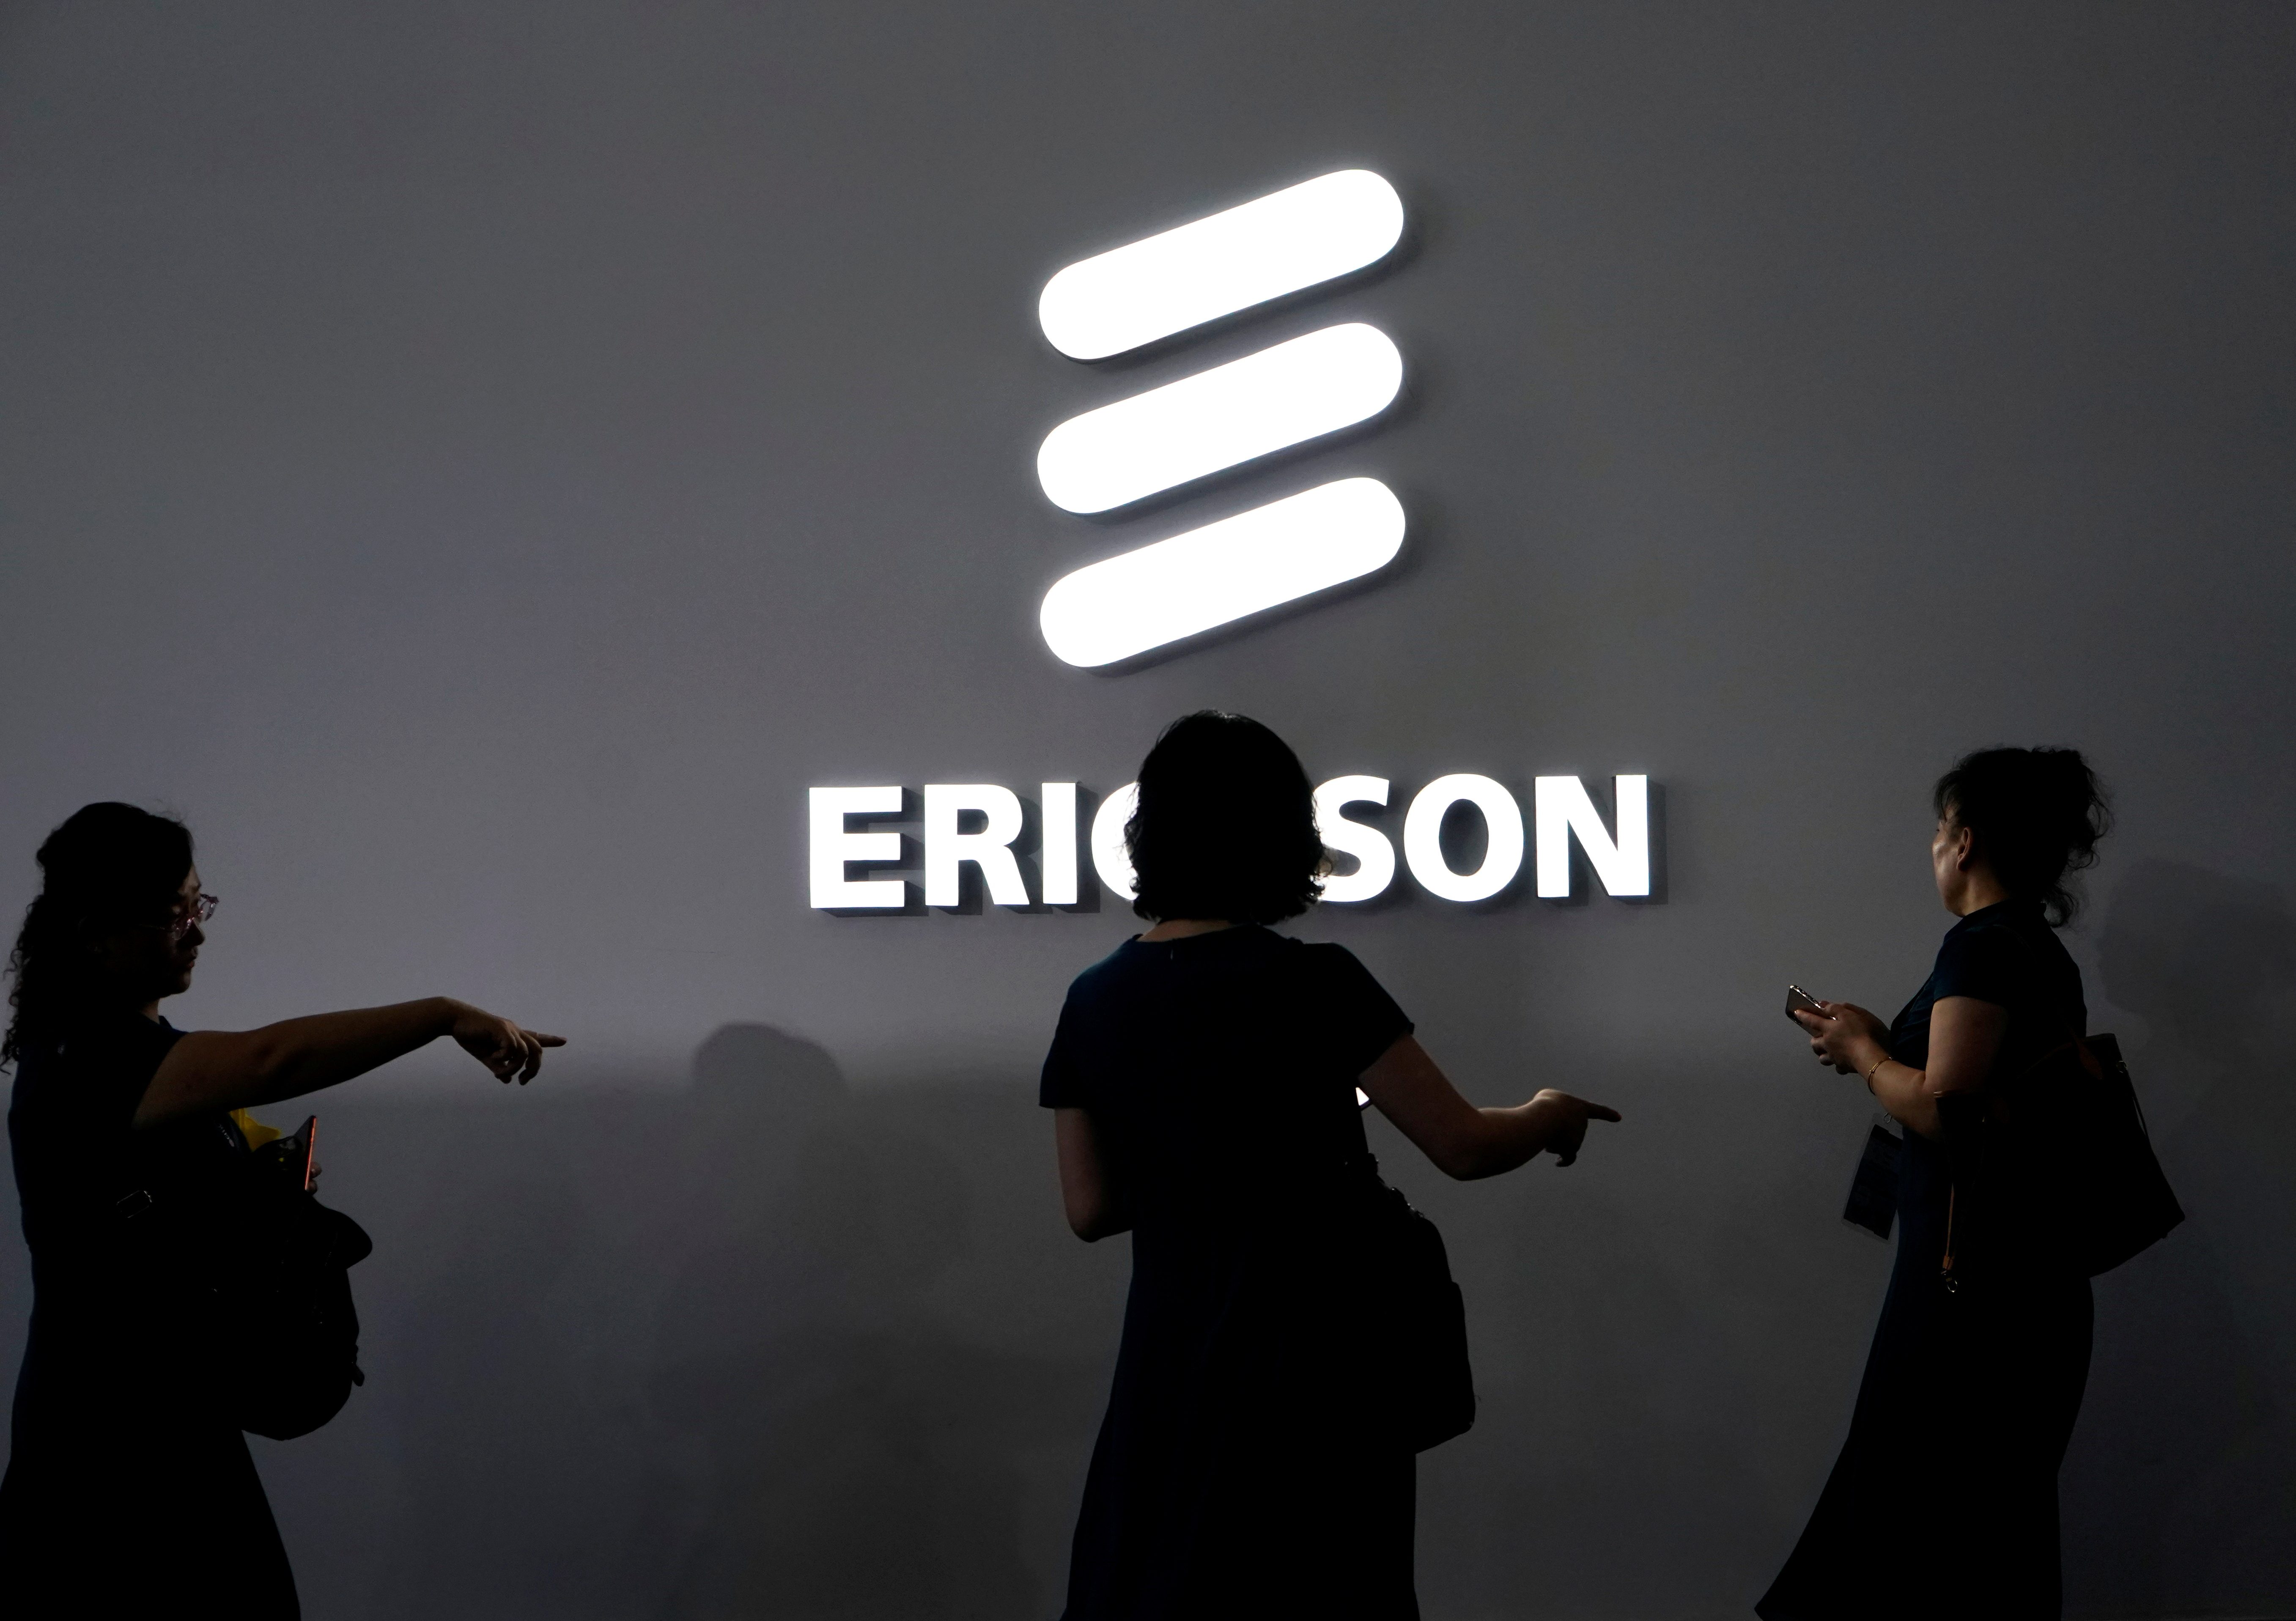 Ericsson’s 5G march hits a wall in China, shares fall